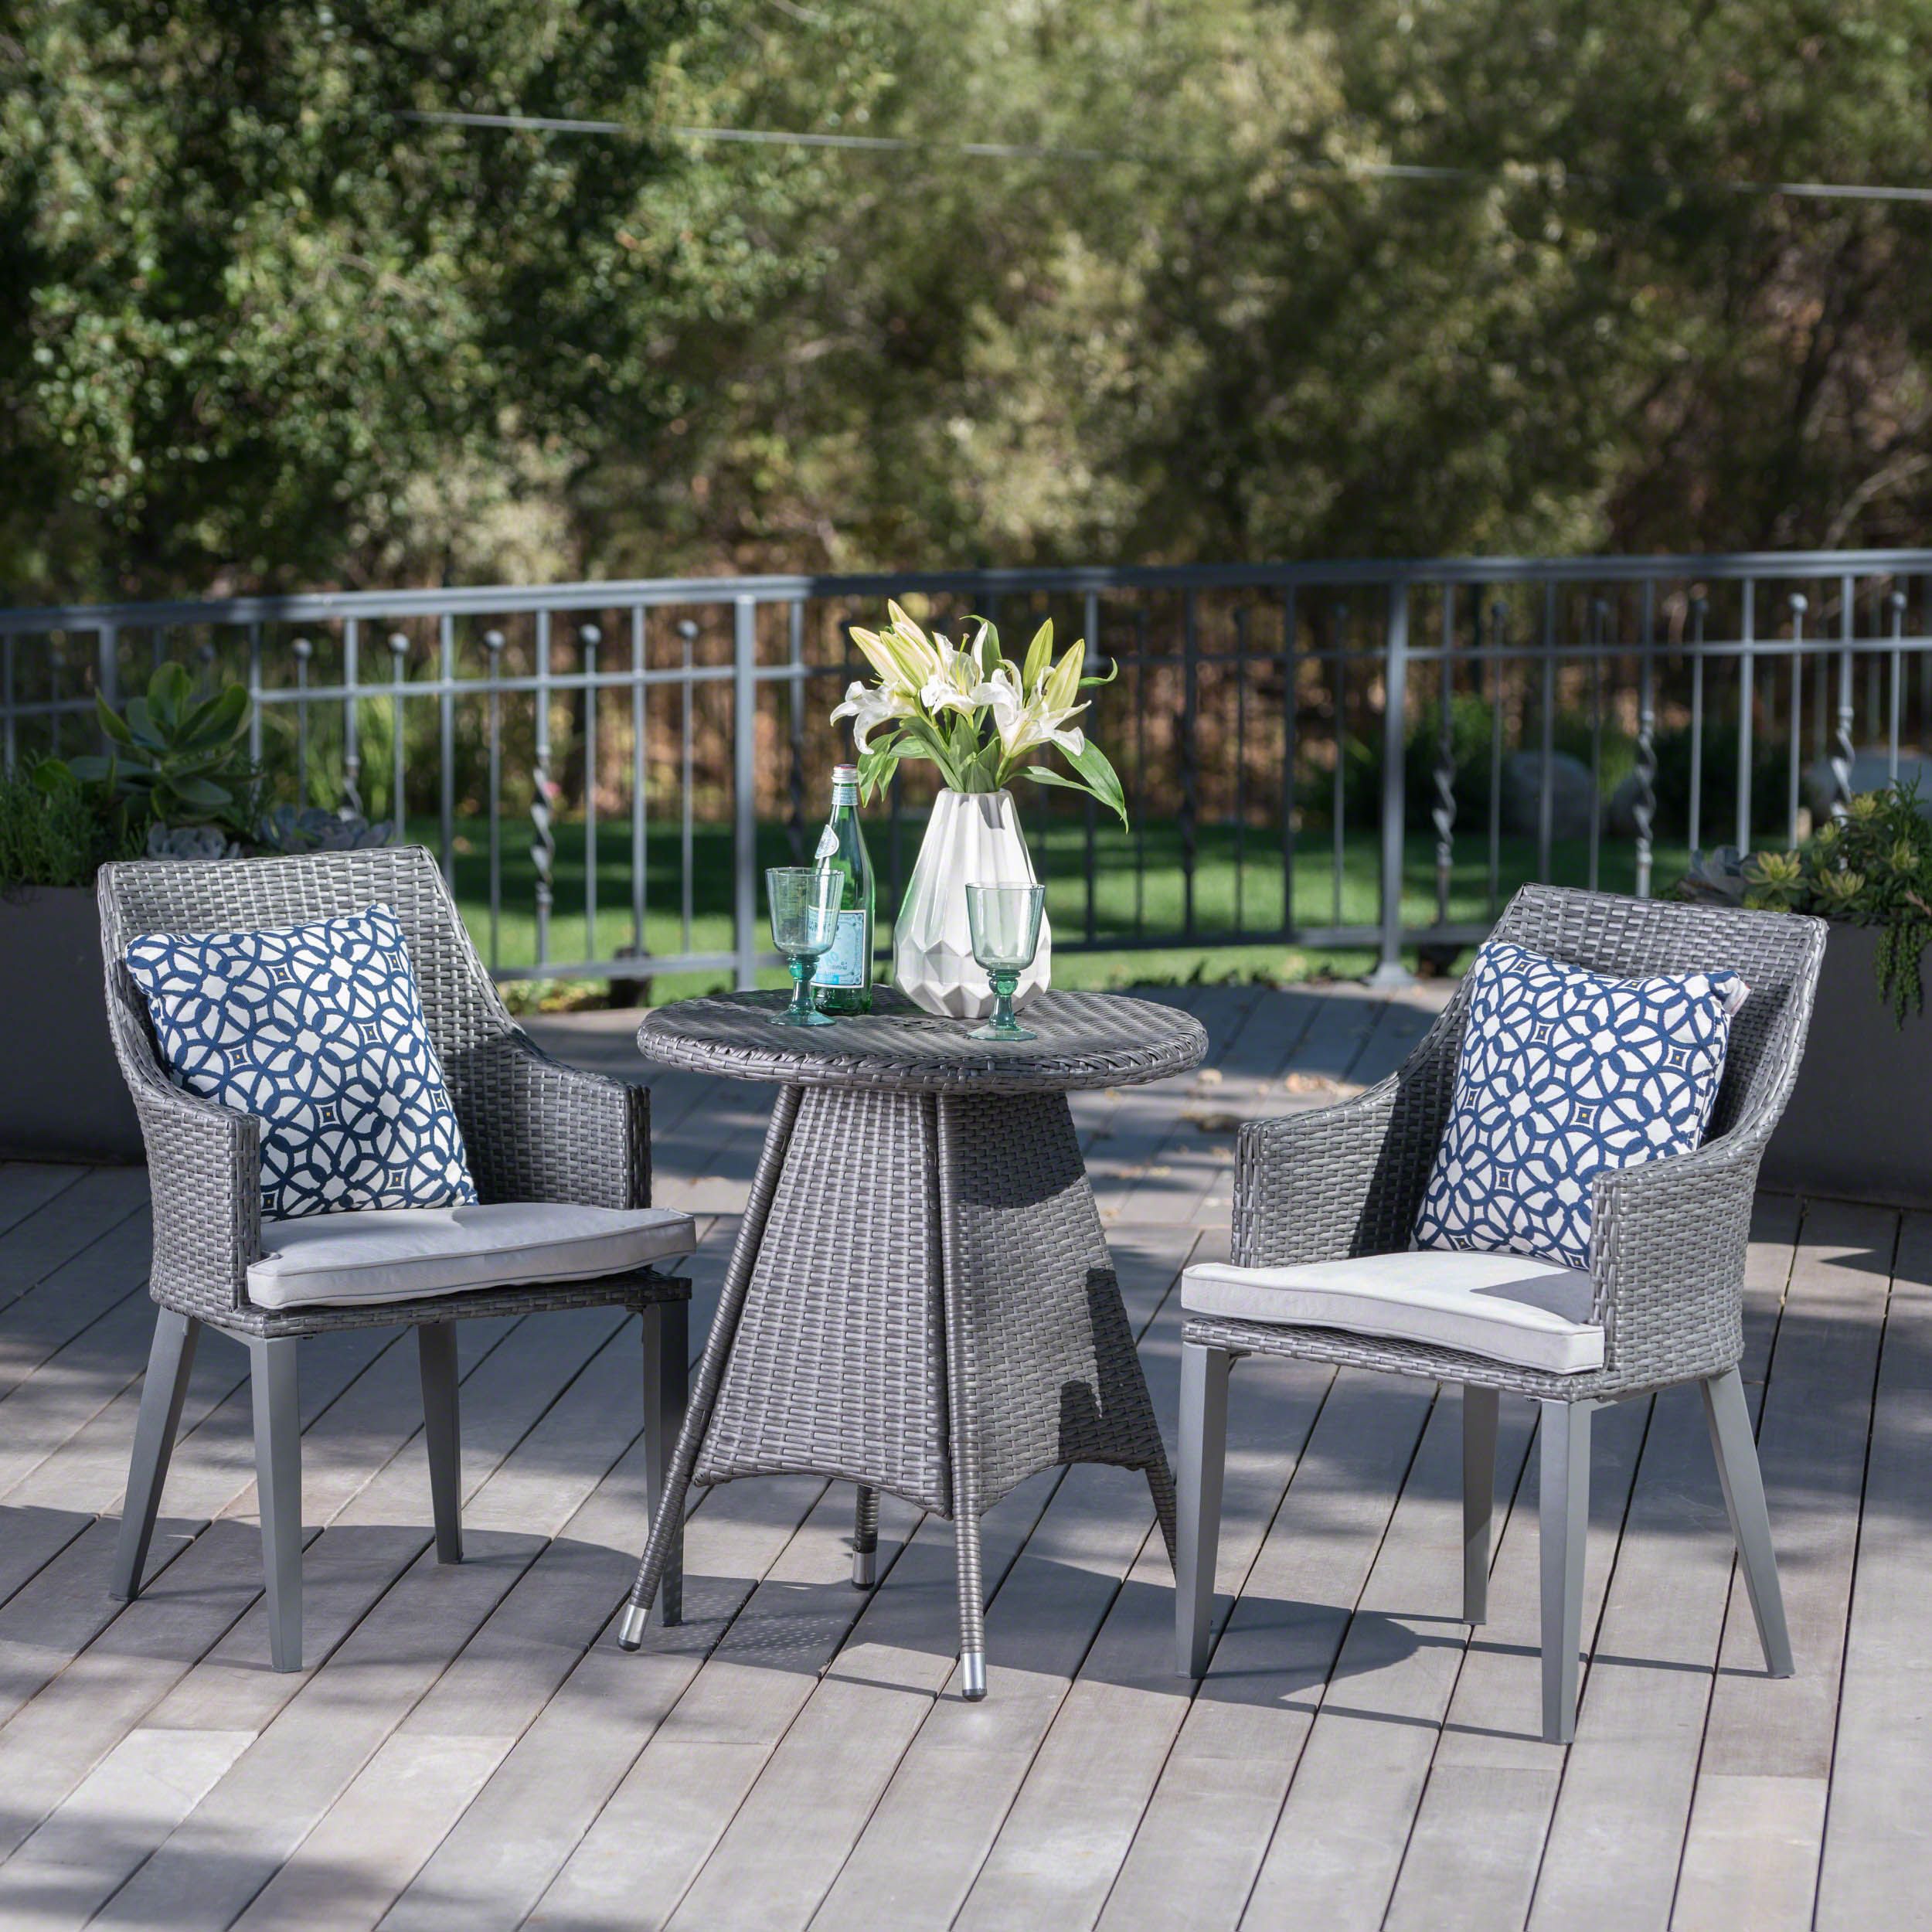 Hillsdale Outdoor 3 Piece Wicker Round Bistro Set With Cushions, Grey Intended For 3 Piece Patio Bistro Sets (View 1 of 15)